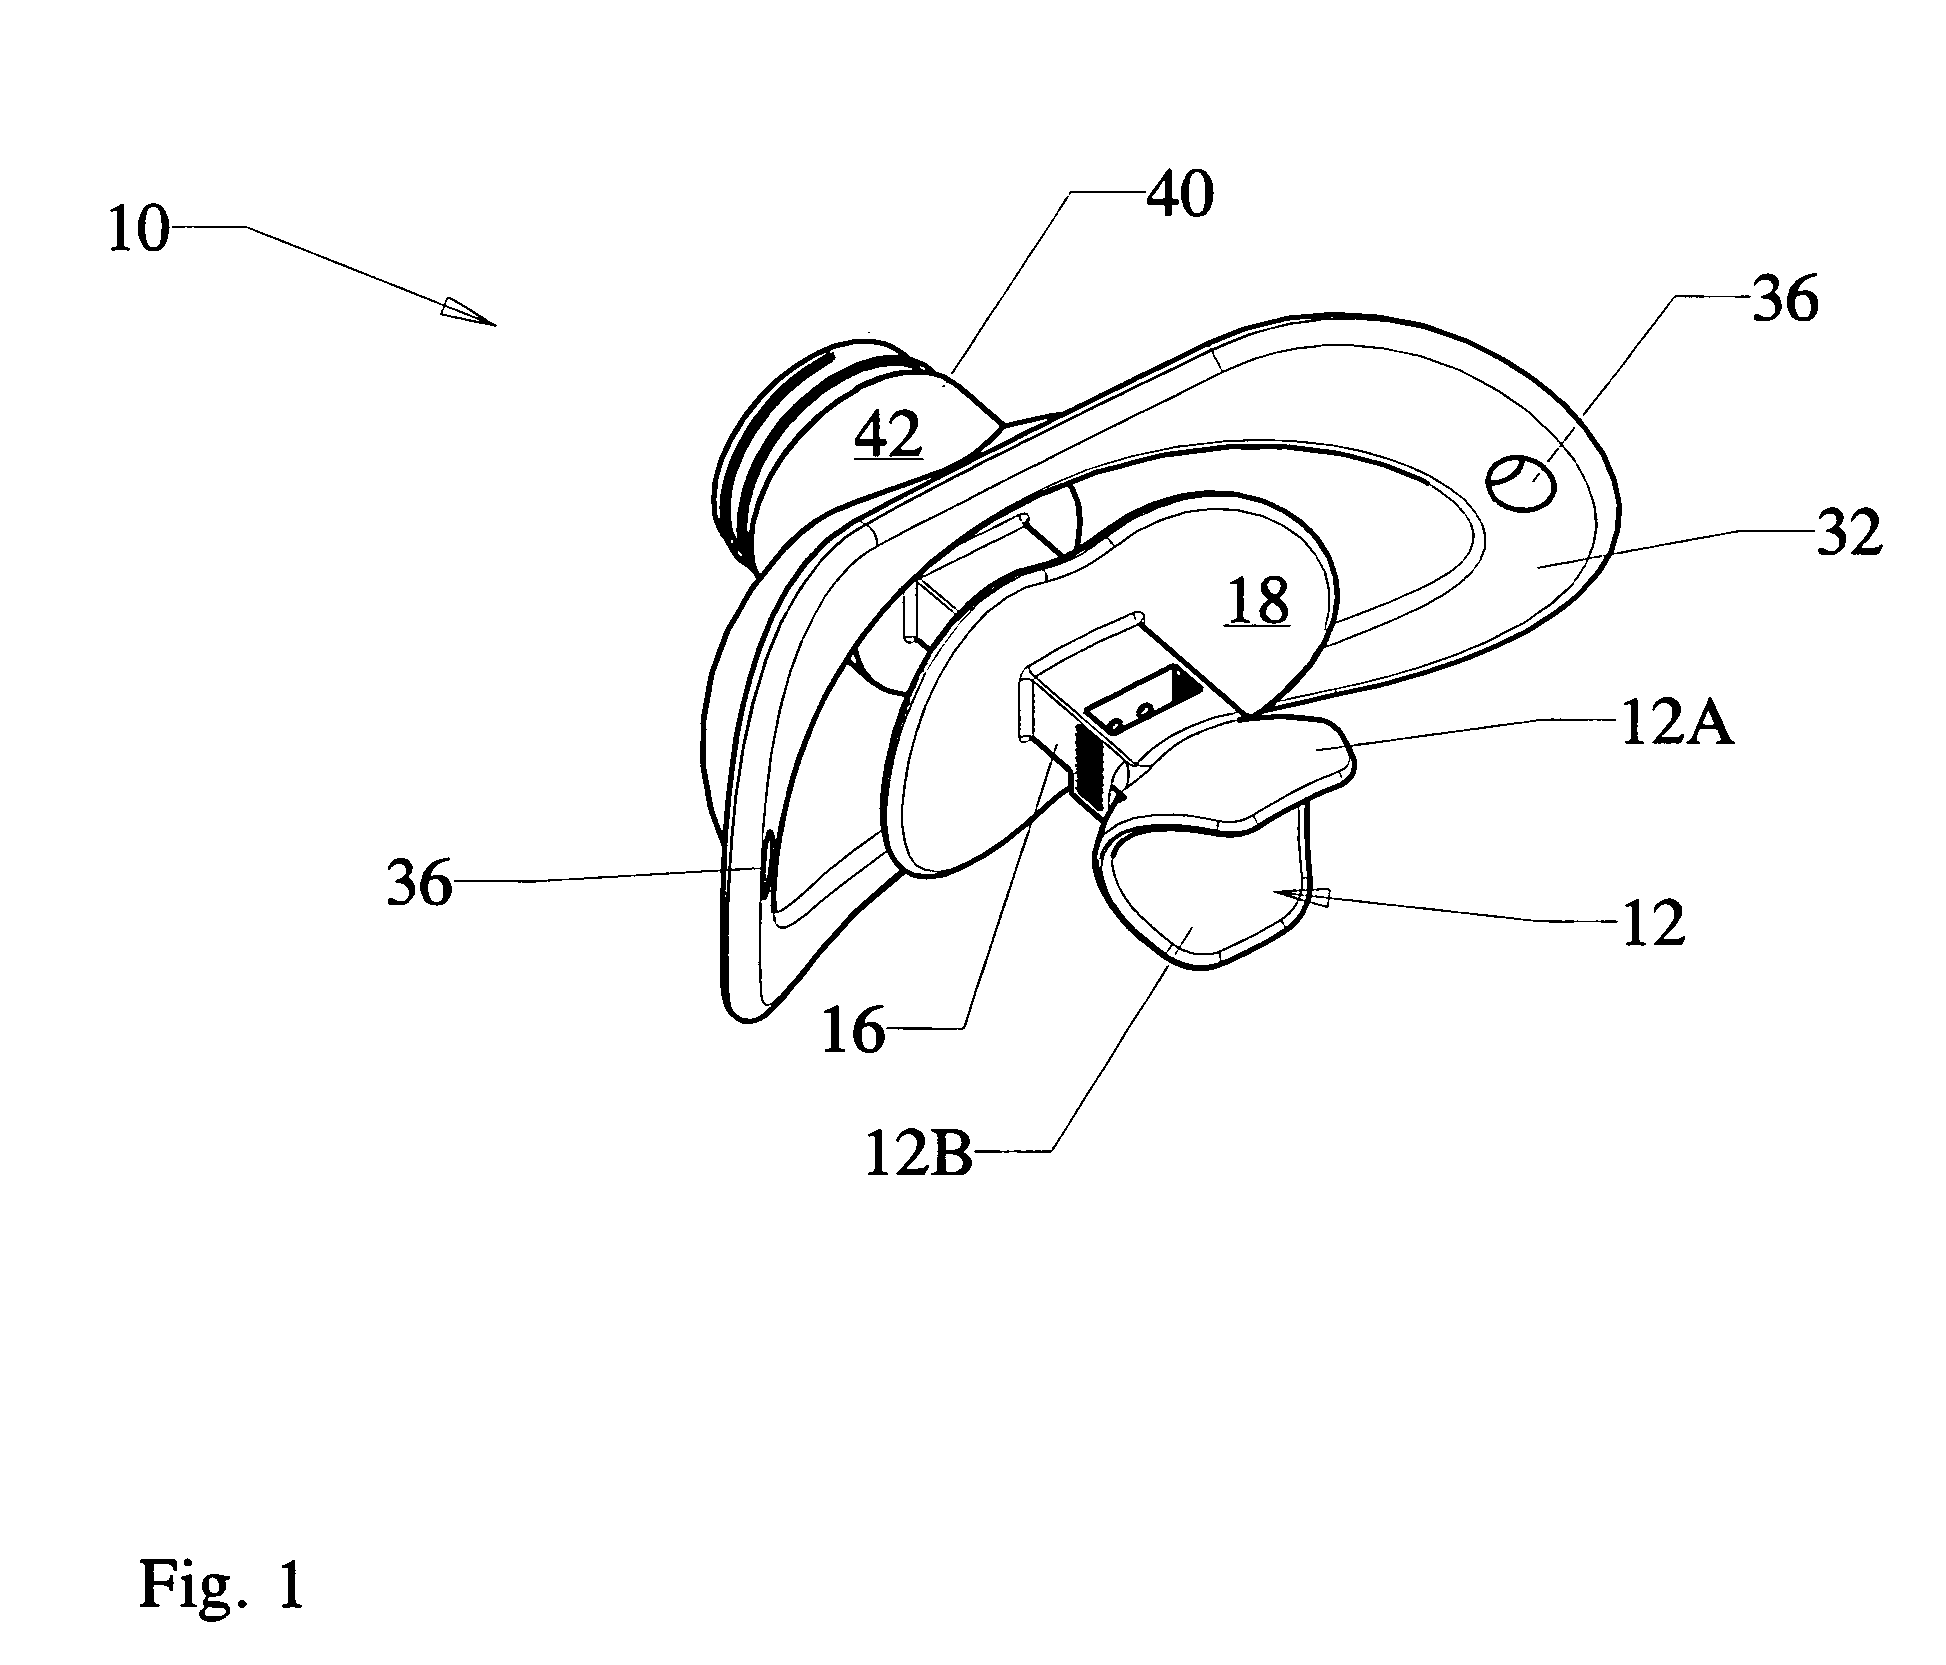 Breathing normalizer apparatus